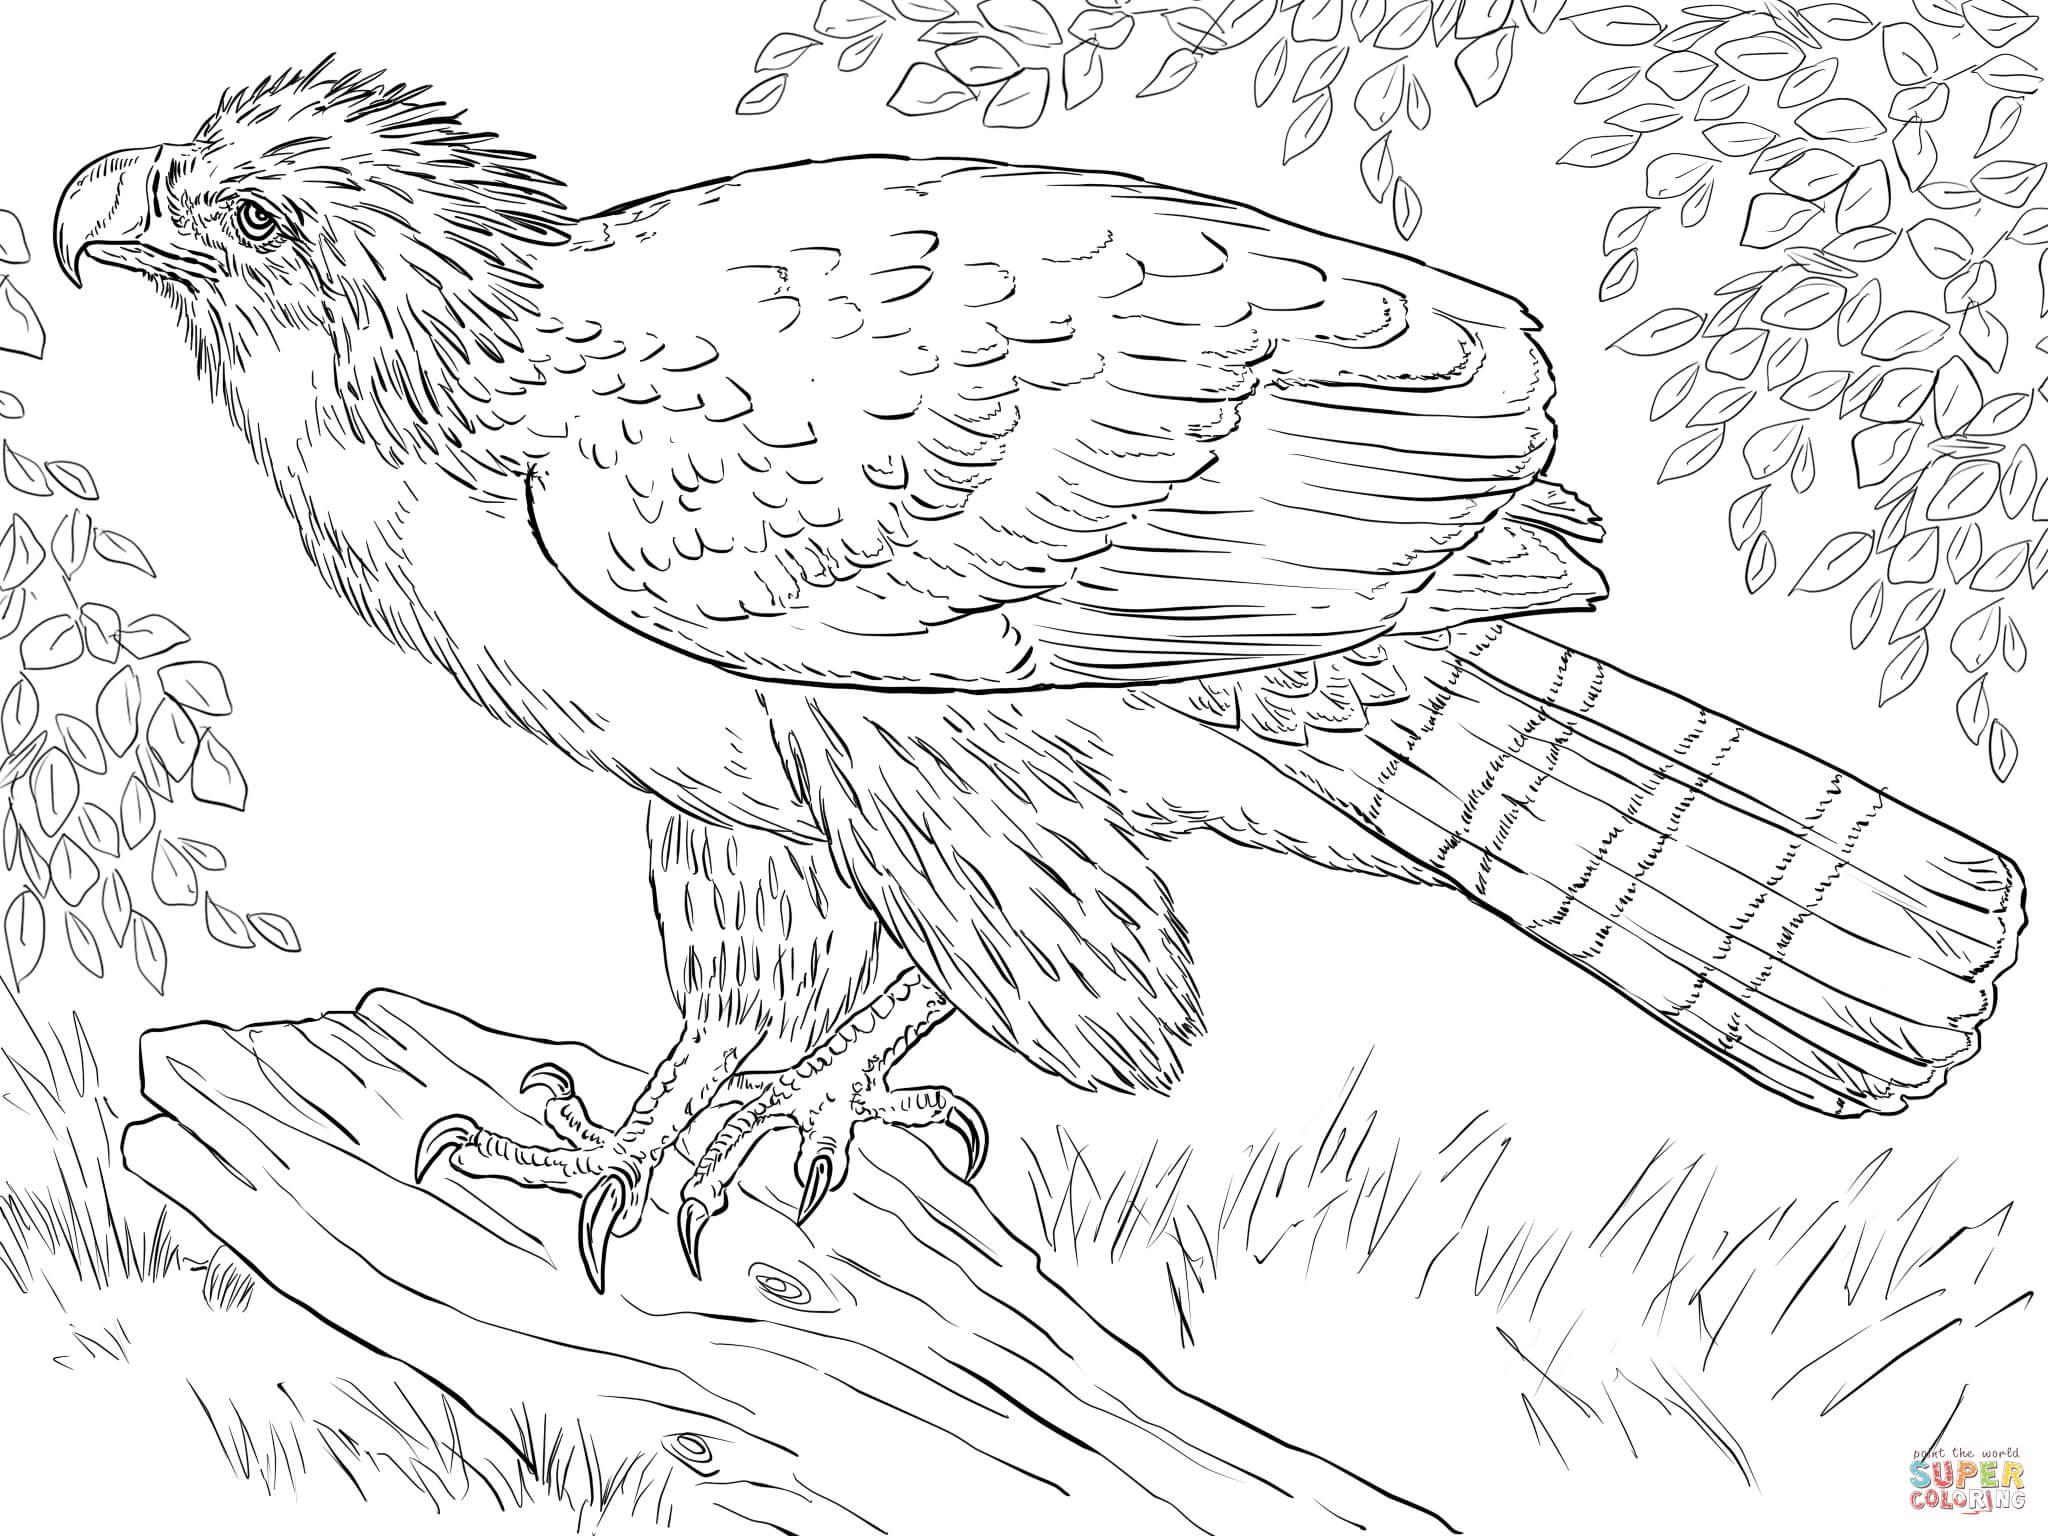 Harpy Eagle coloring #7, Download drawings